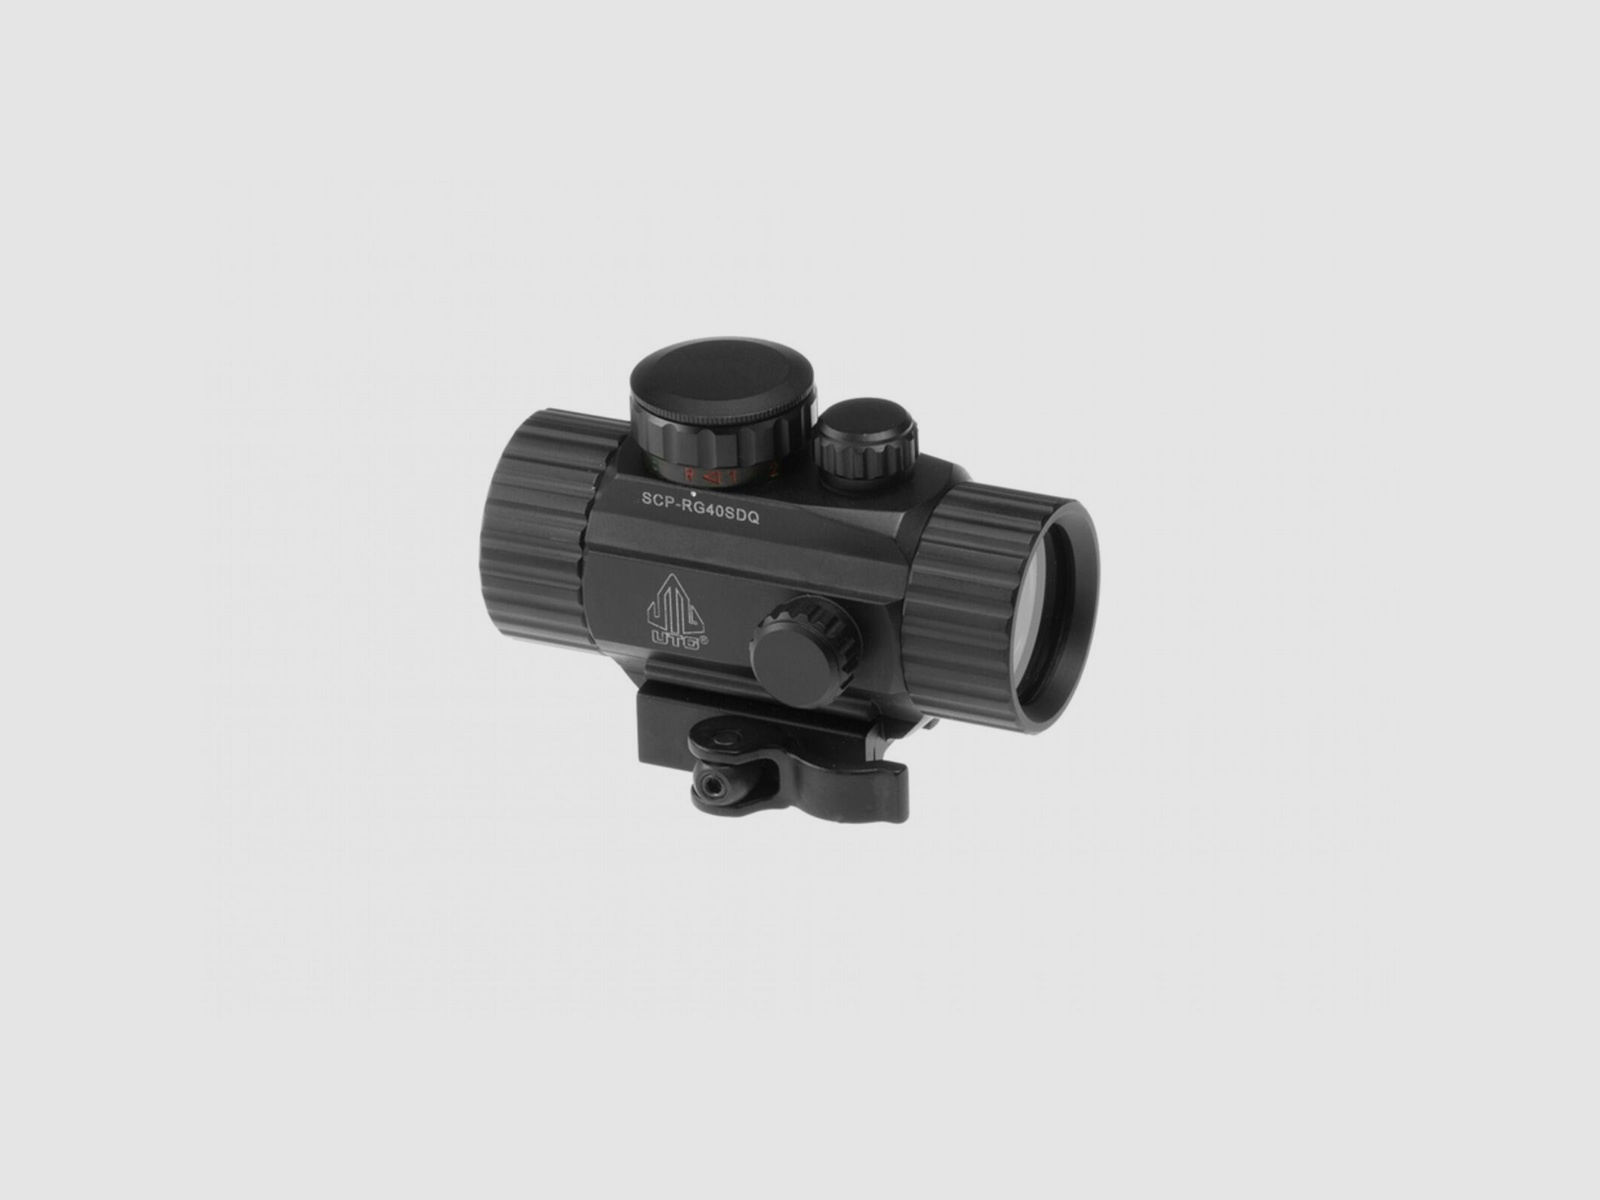 Leapers 3.8 Inch 1x30 Tactical Dot Sight TS-Schwarz